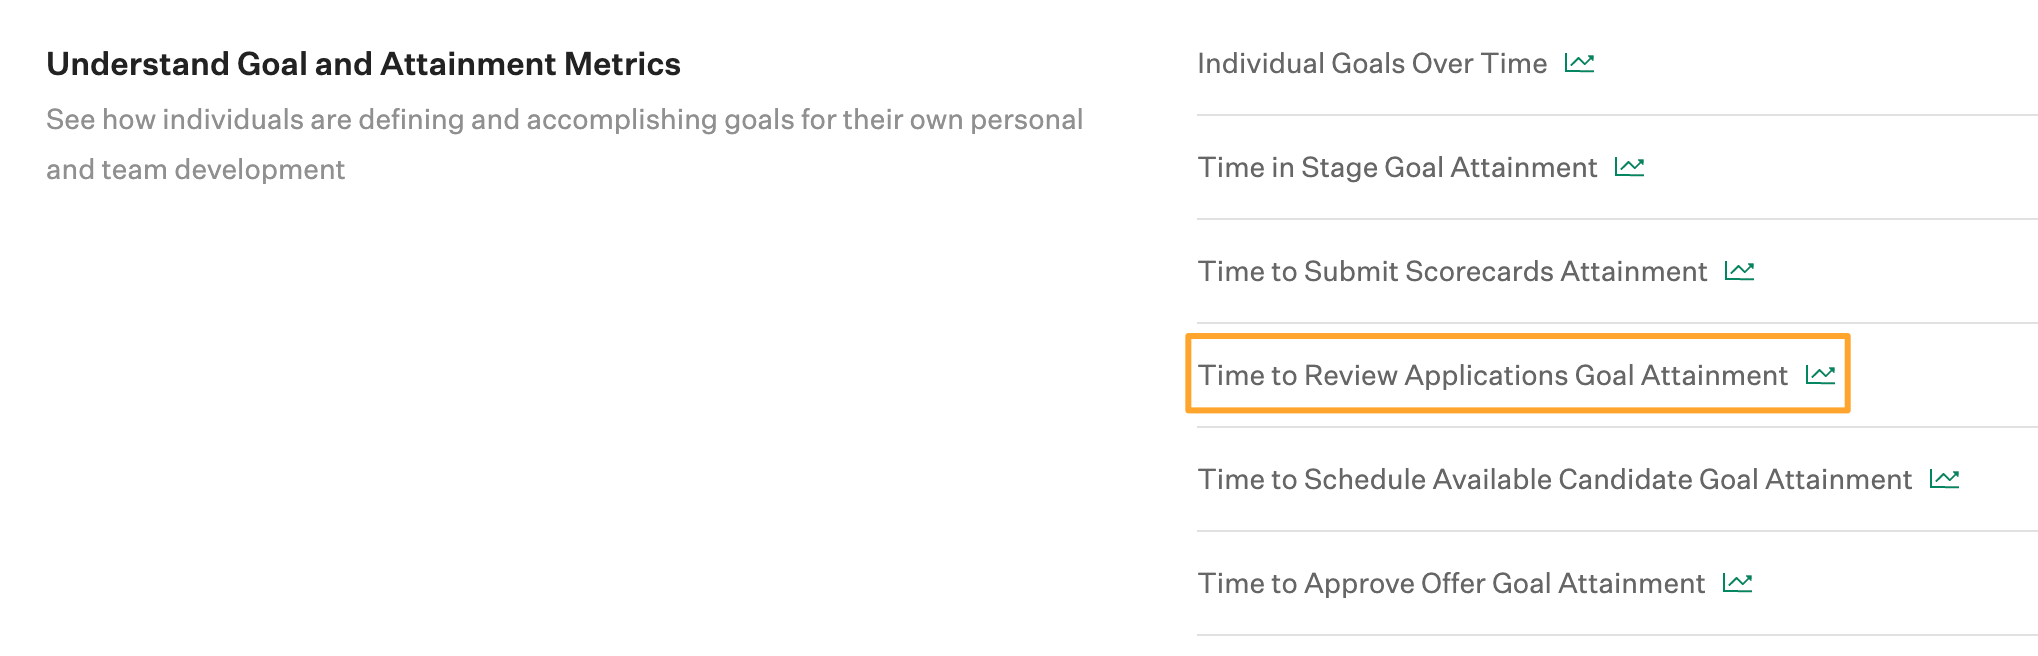 Screenshot-of-time-to-review-applications-goal-attainment.png